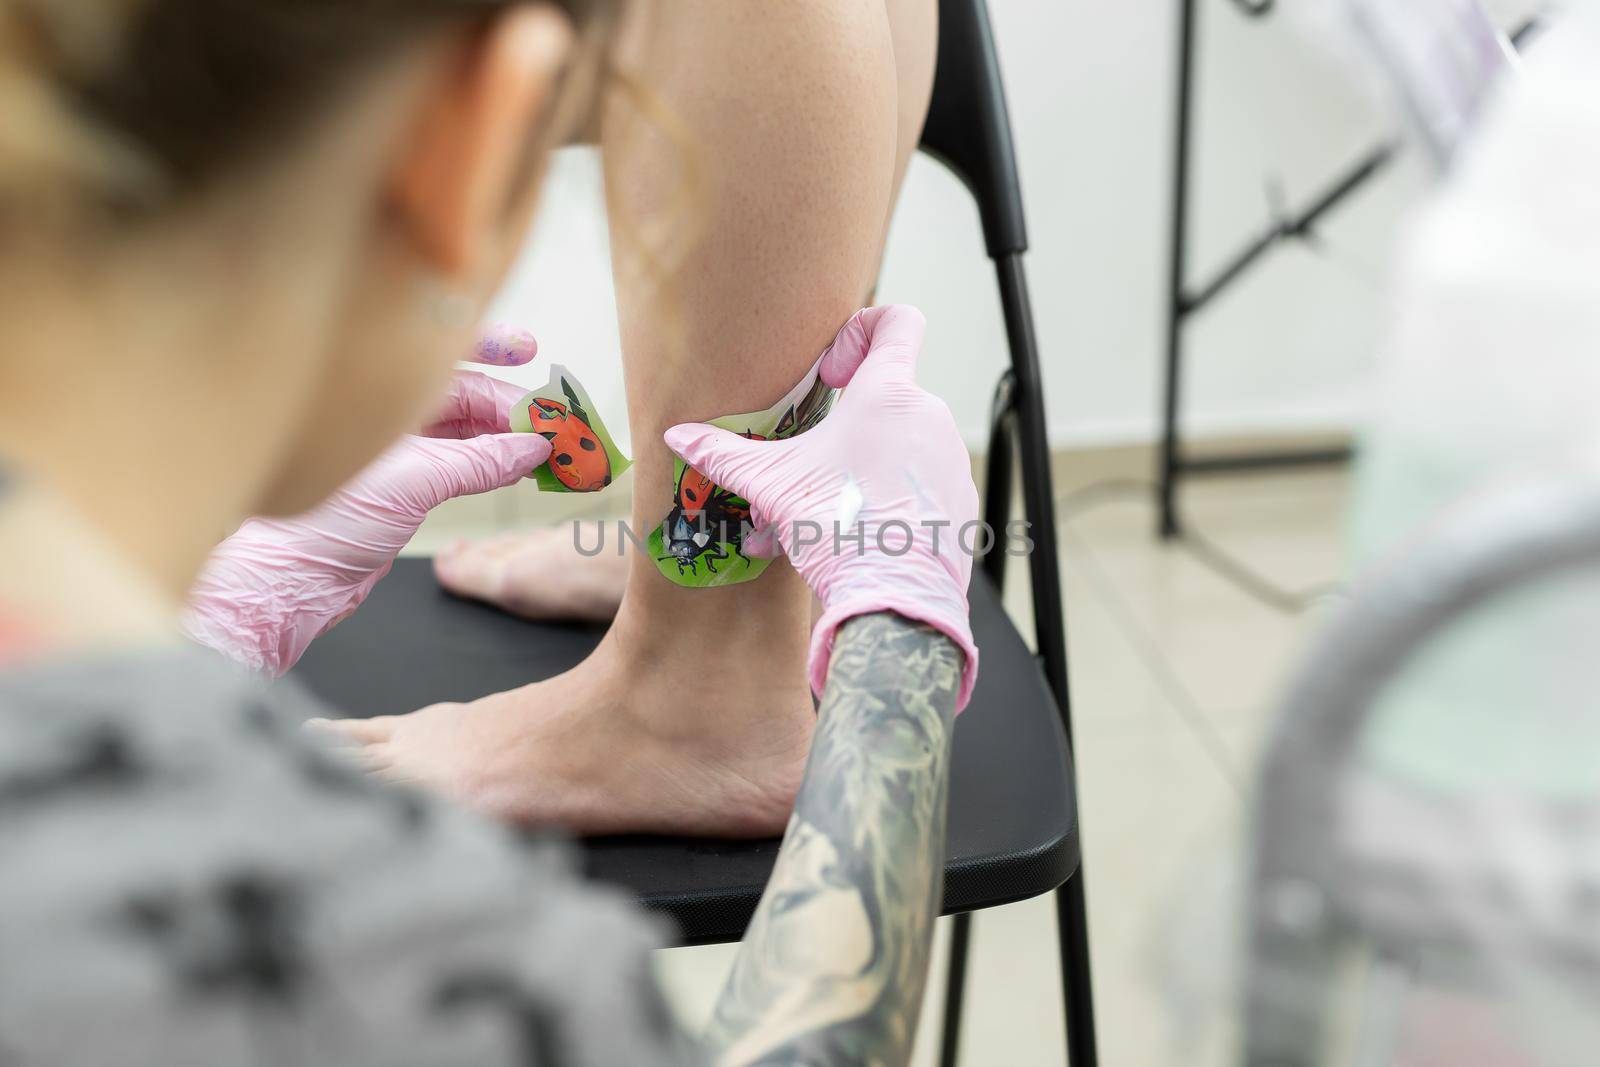 Tattoo artist puts a drawing of a ladybug on the leg of a young woman, the process of creating a tattoo. A girl takes a picture on a woman's leg. A tattoo artist makes a tattoo. Close-up by StudioPeace